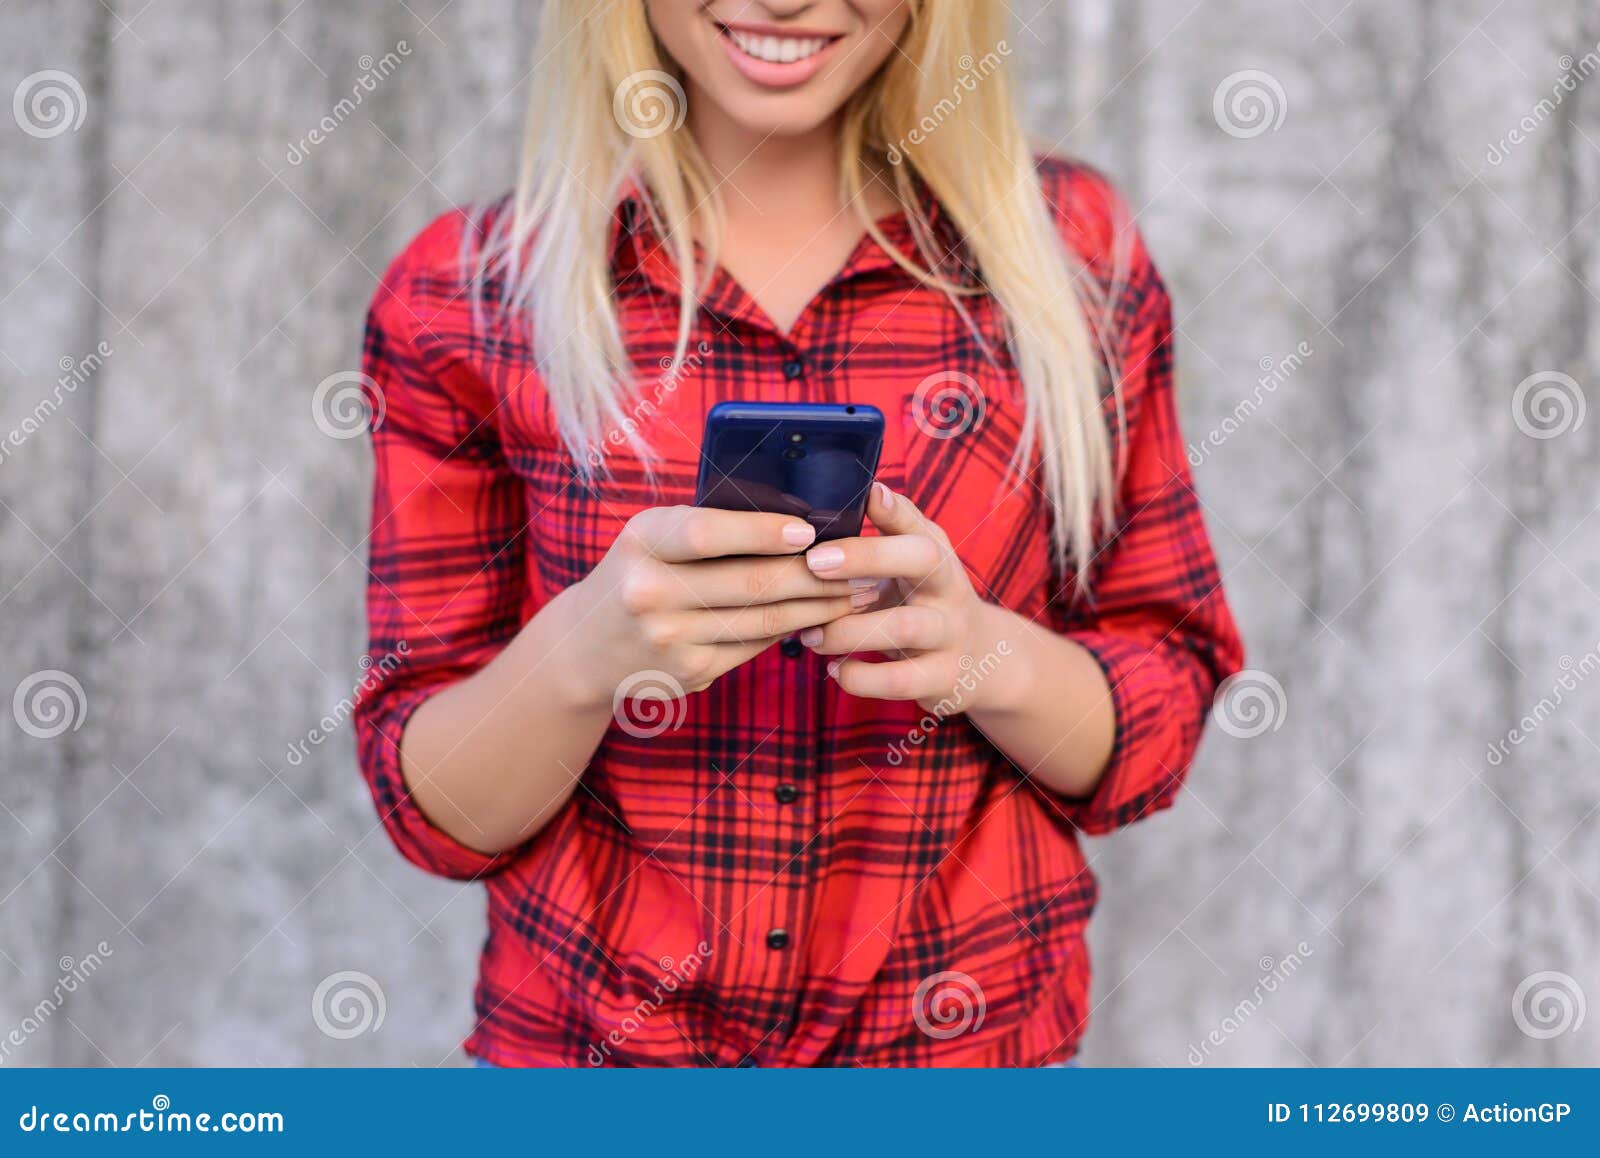 Woman Using Her Smartphone for Surfing the Internet, she is Watching Funny  Videos on the Internet. Young Girl with Beaming Smile Stock Image - Image  of casual, funny: 112699809